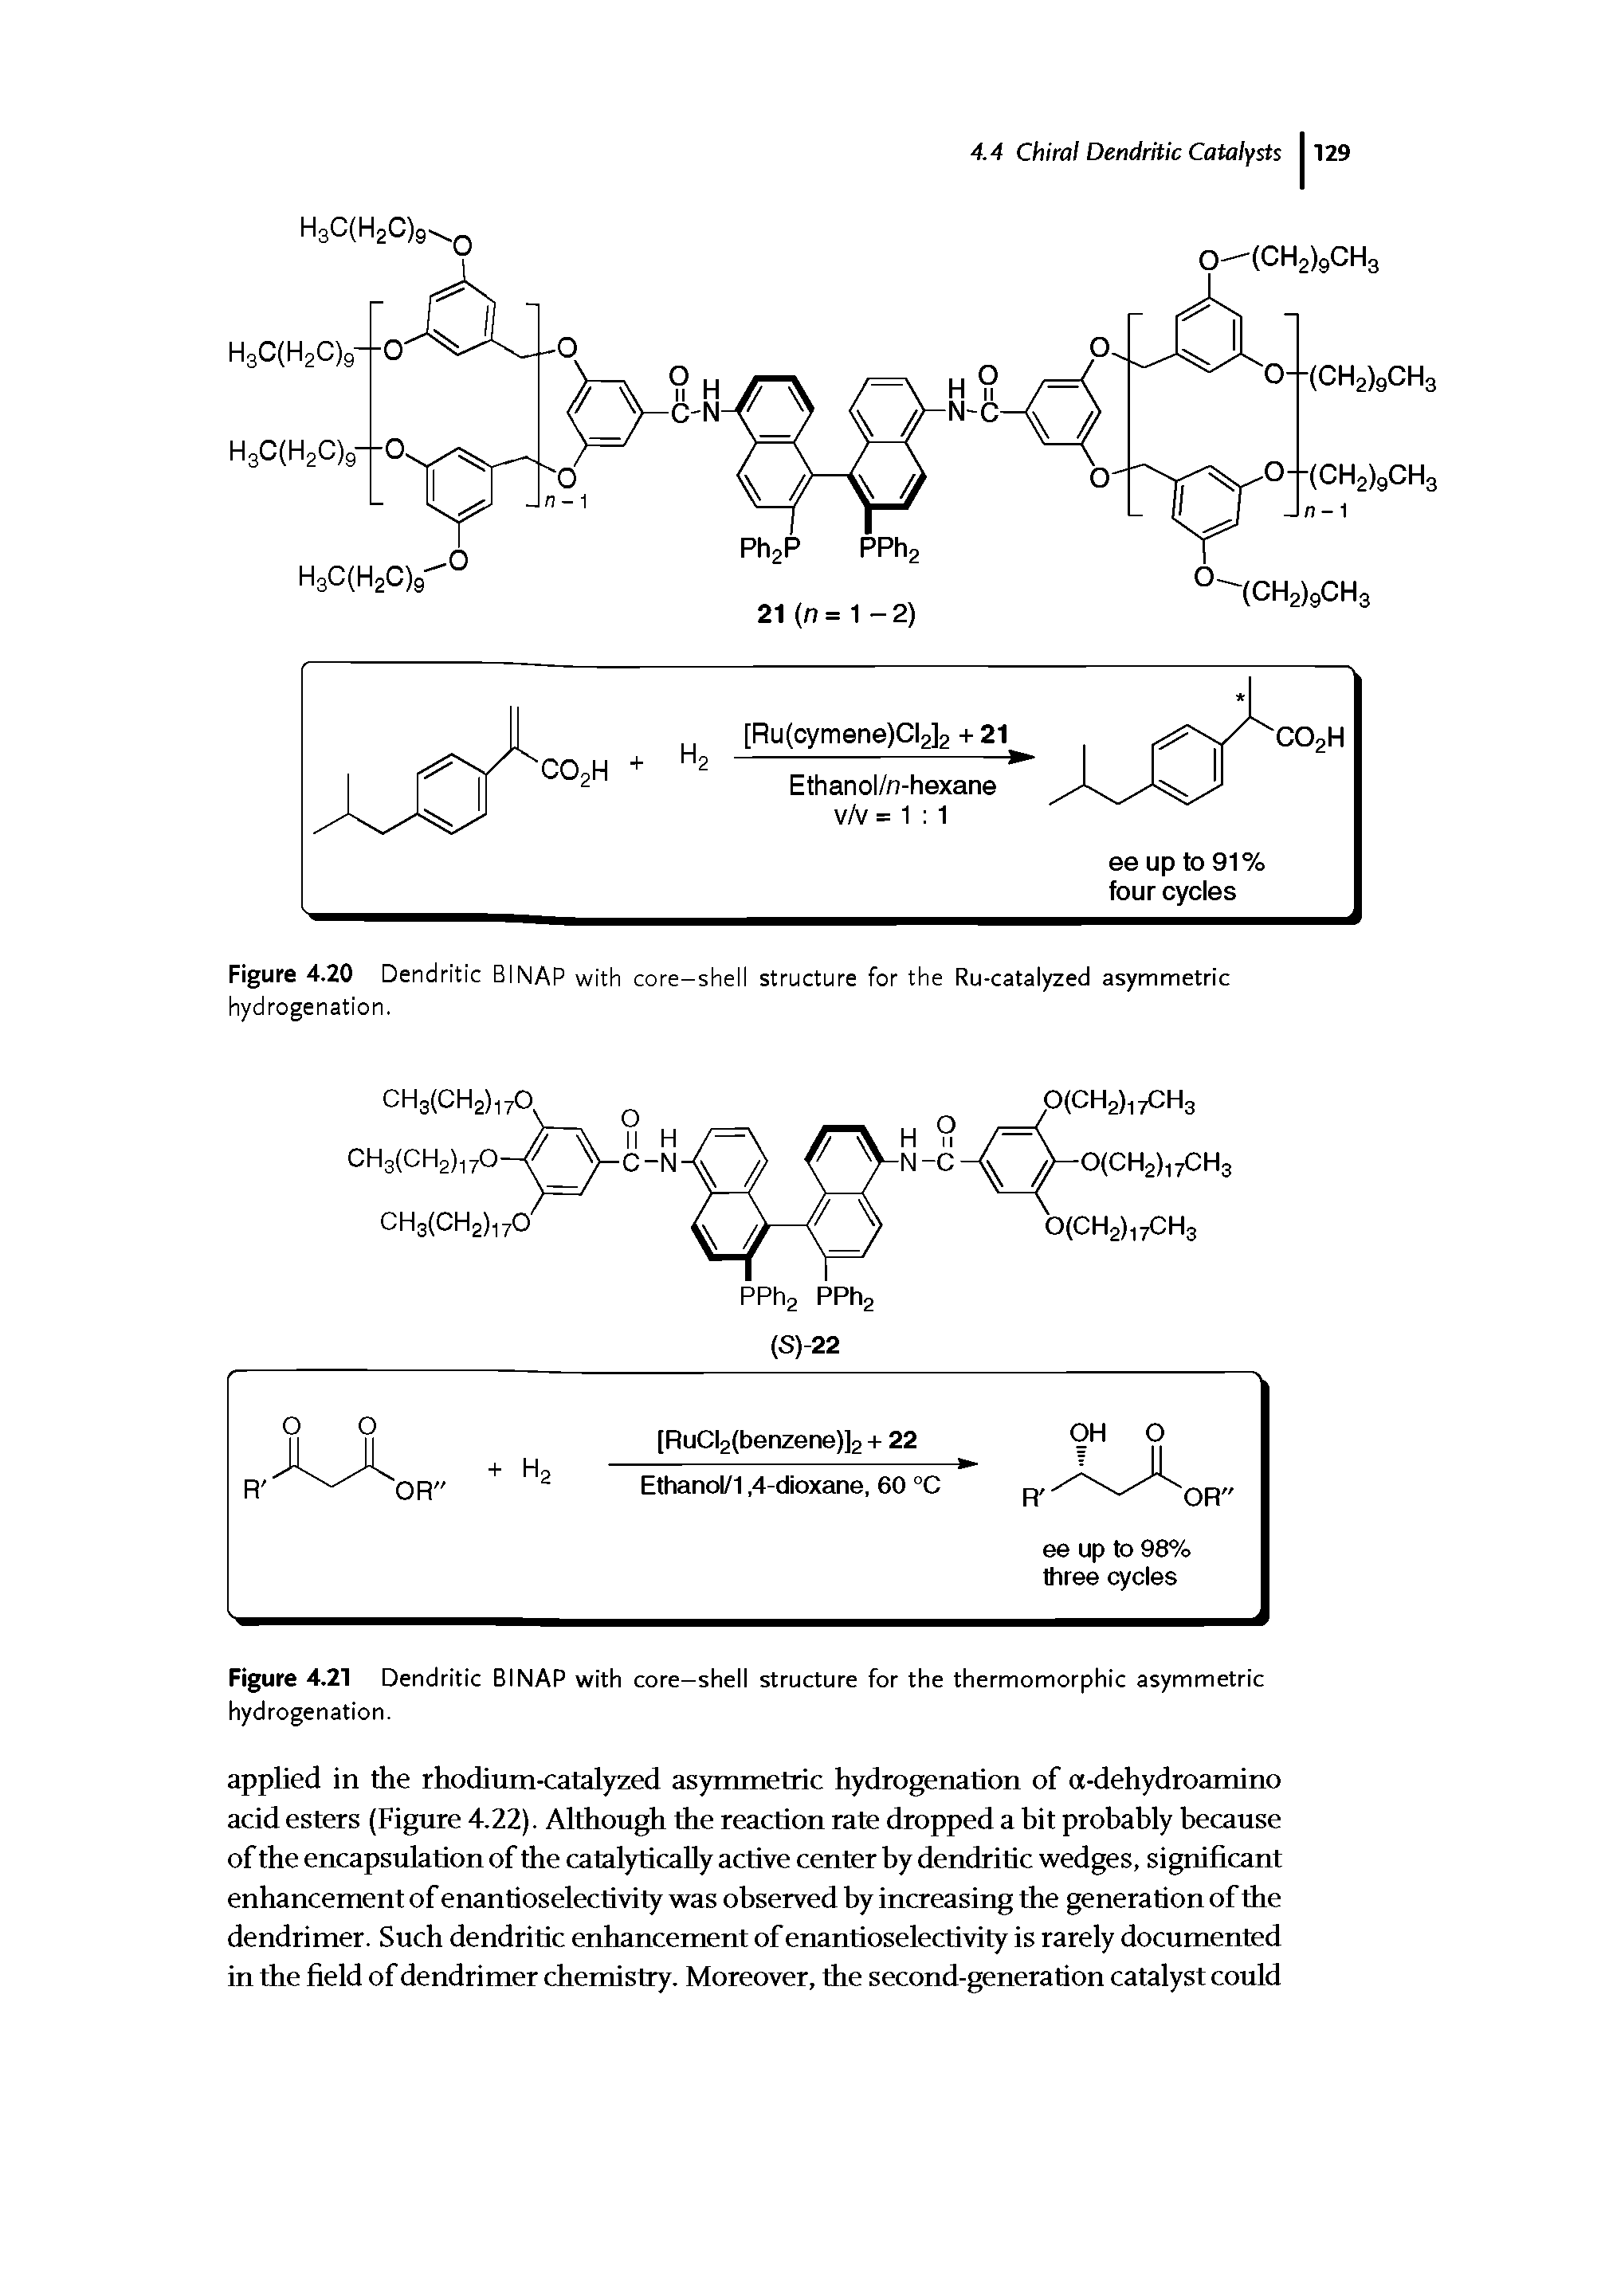 Figure 4.21 Dendritic BINAP with core-shell structure for the thermomorphic asymmetric hydrogenation.